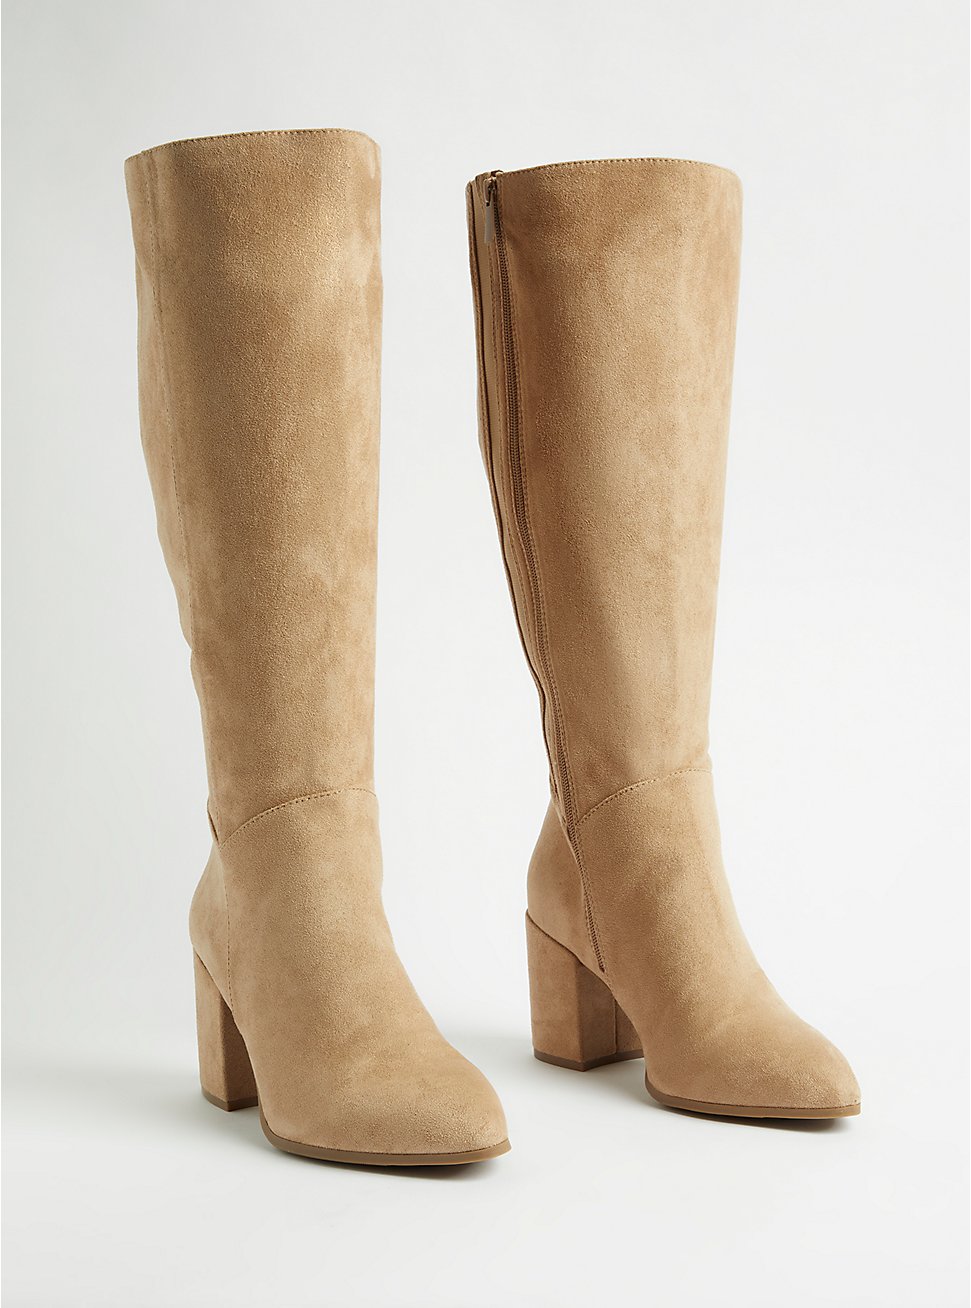 Plus Size Pointed Toe Knee Boot - Taupe (WW), TAUPE, hi-res